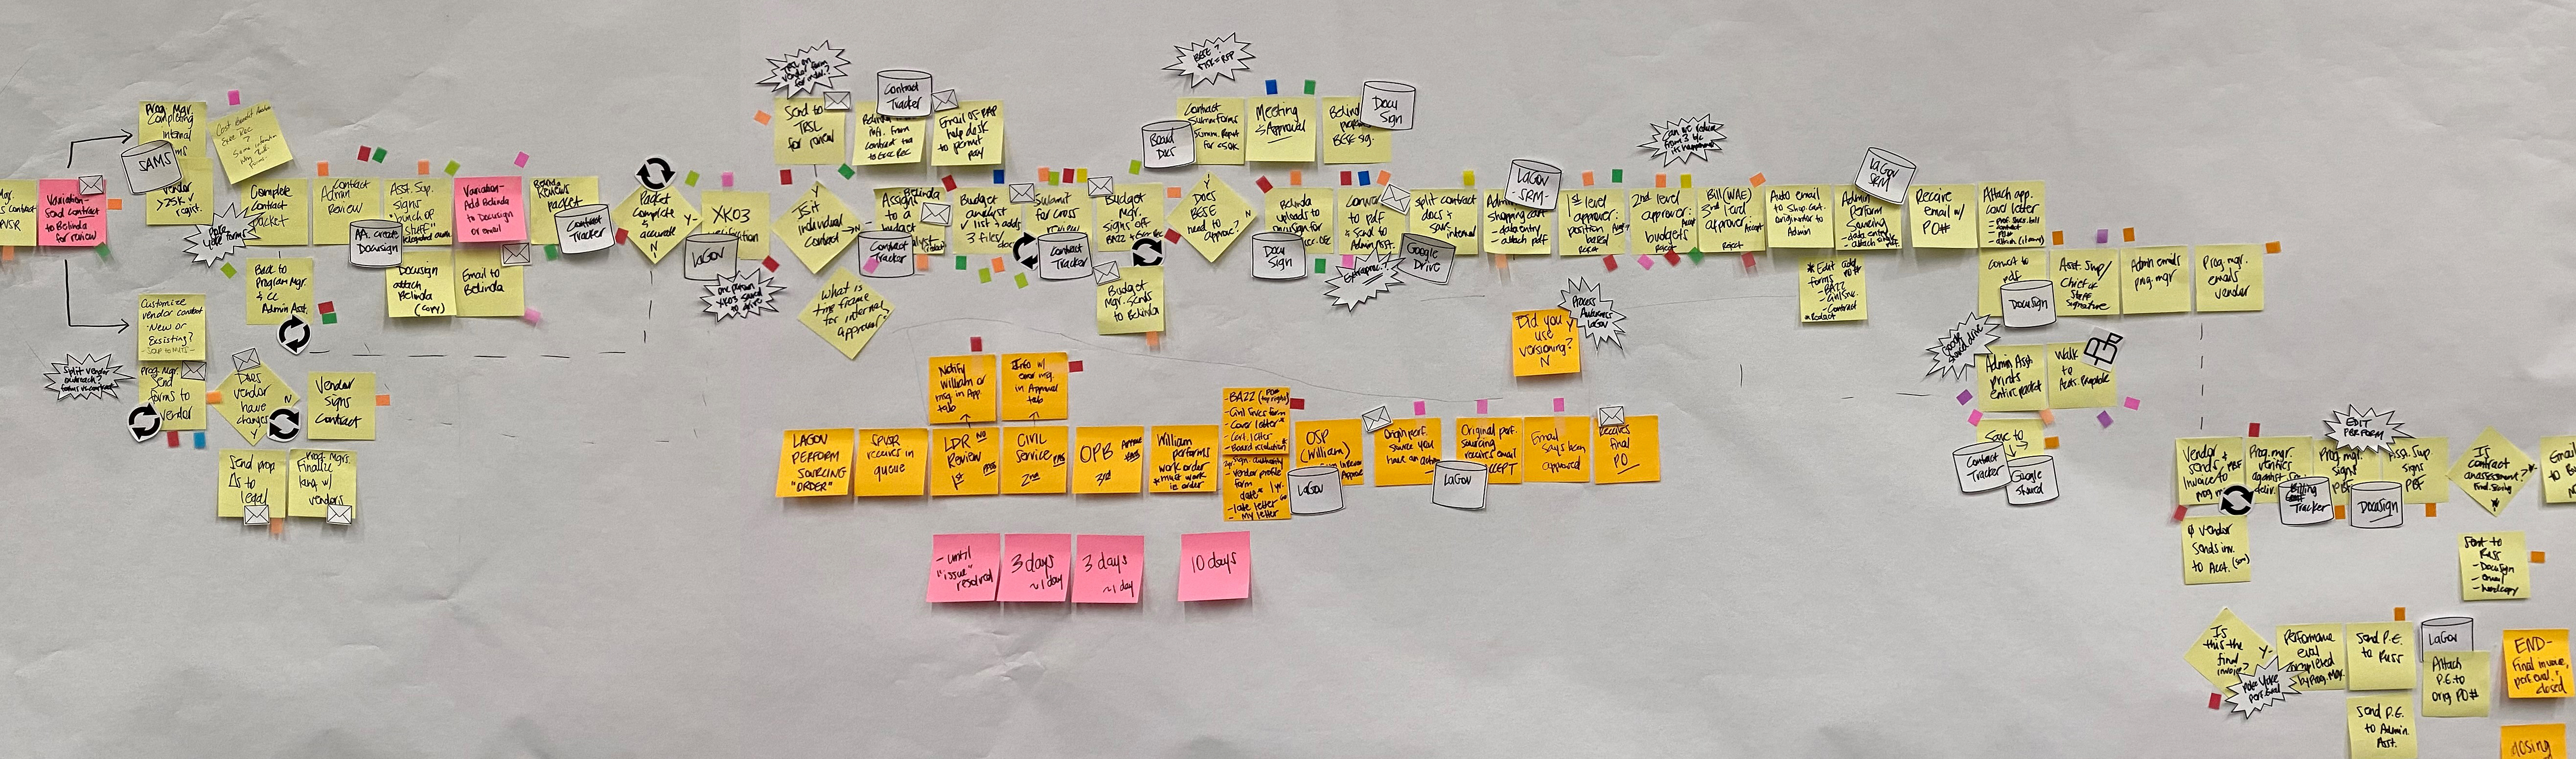 value stream mapping event. Post-it-notes on a white sheet of paper.